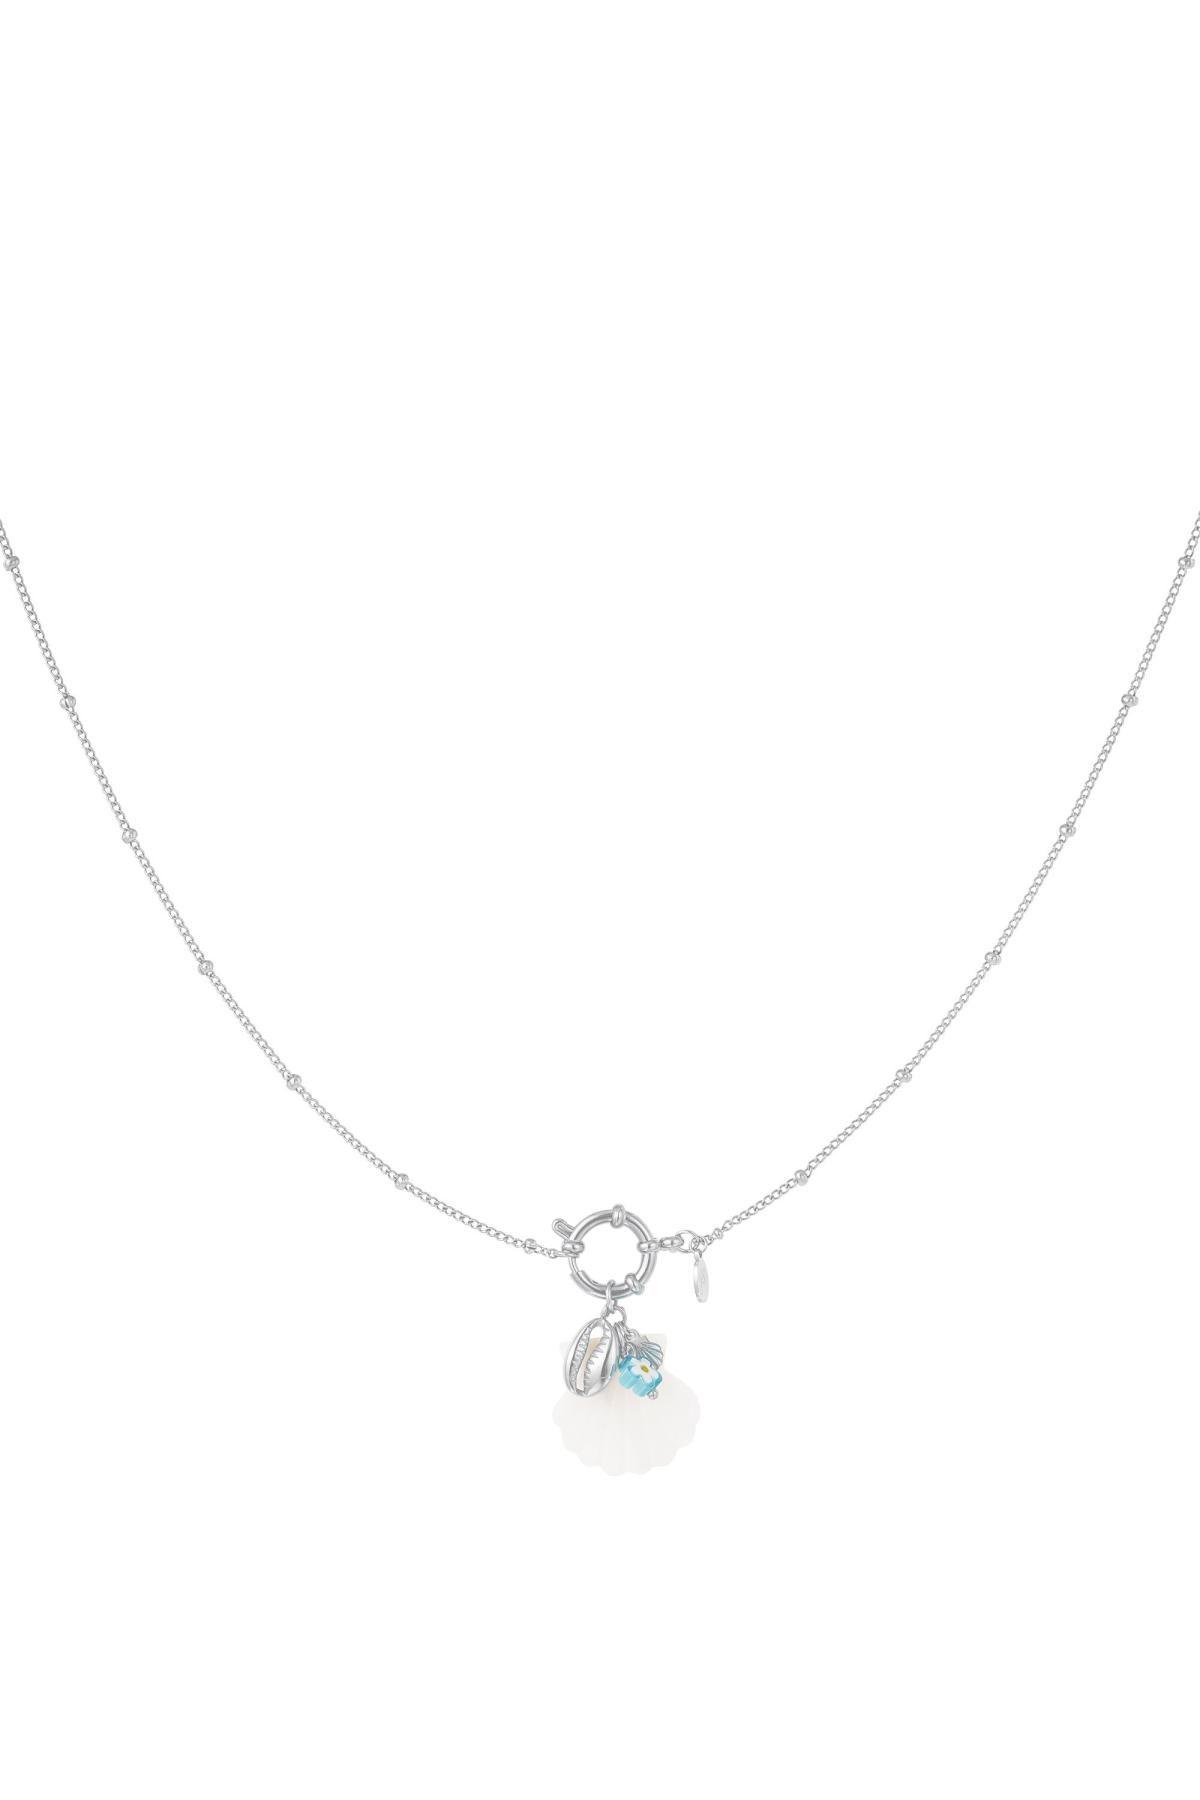 Necklace with shell charm - Beach collection Silver Stainless Steel h5 